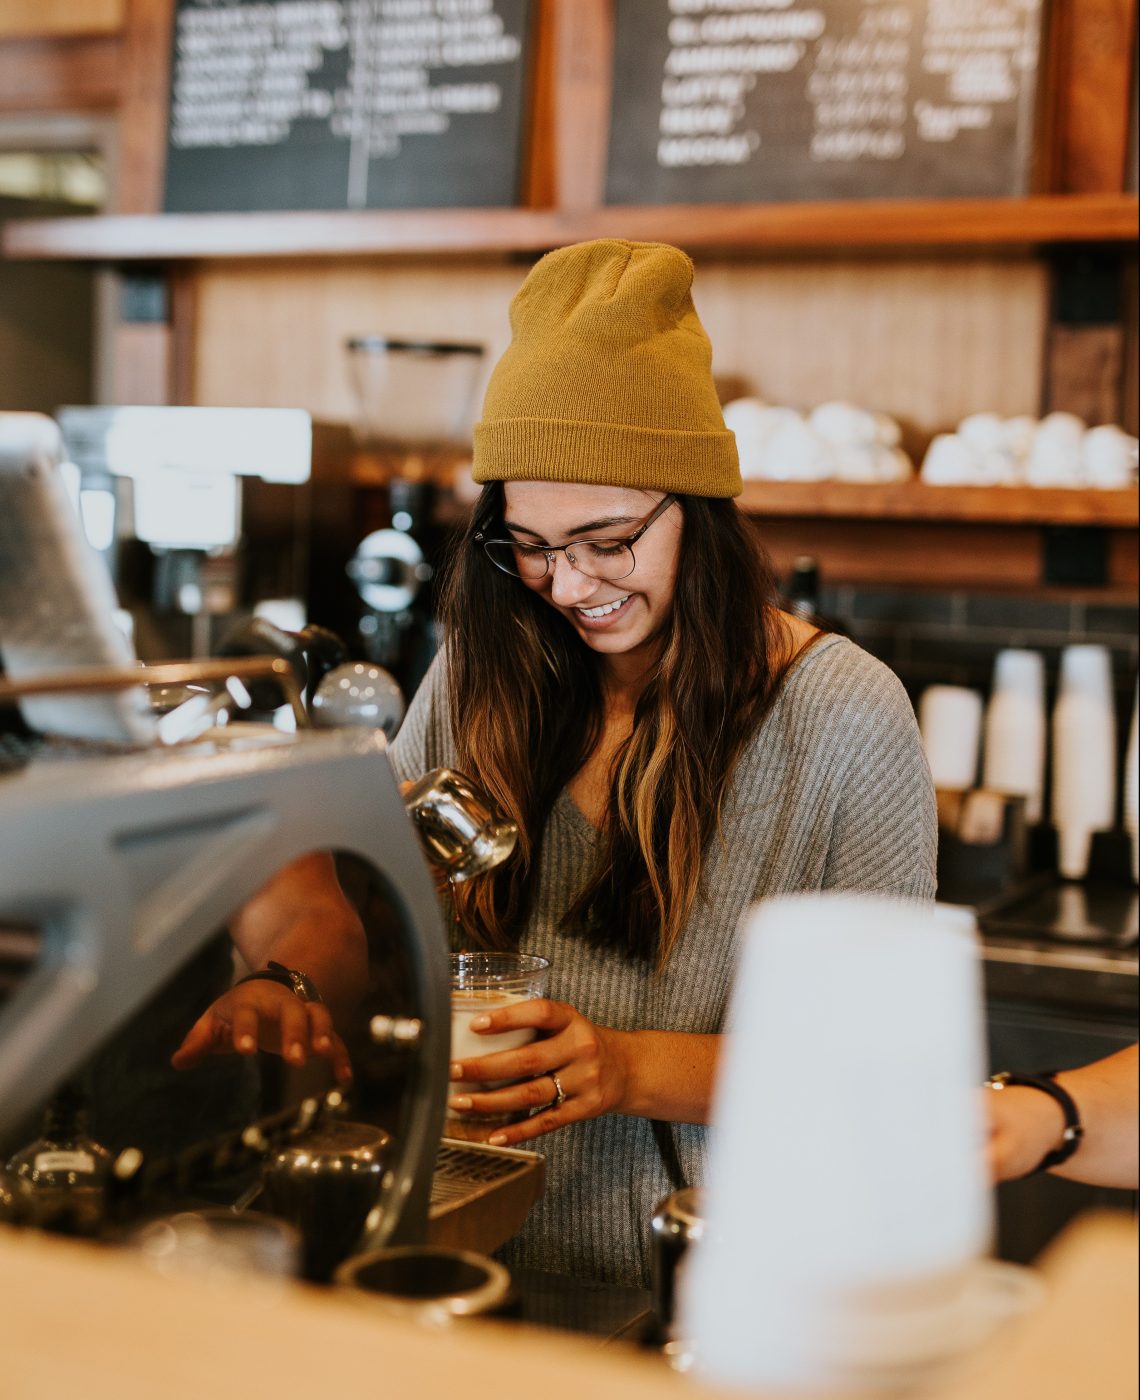 An Open Letter To My Barista